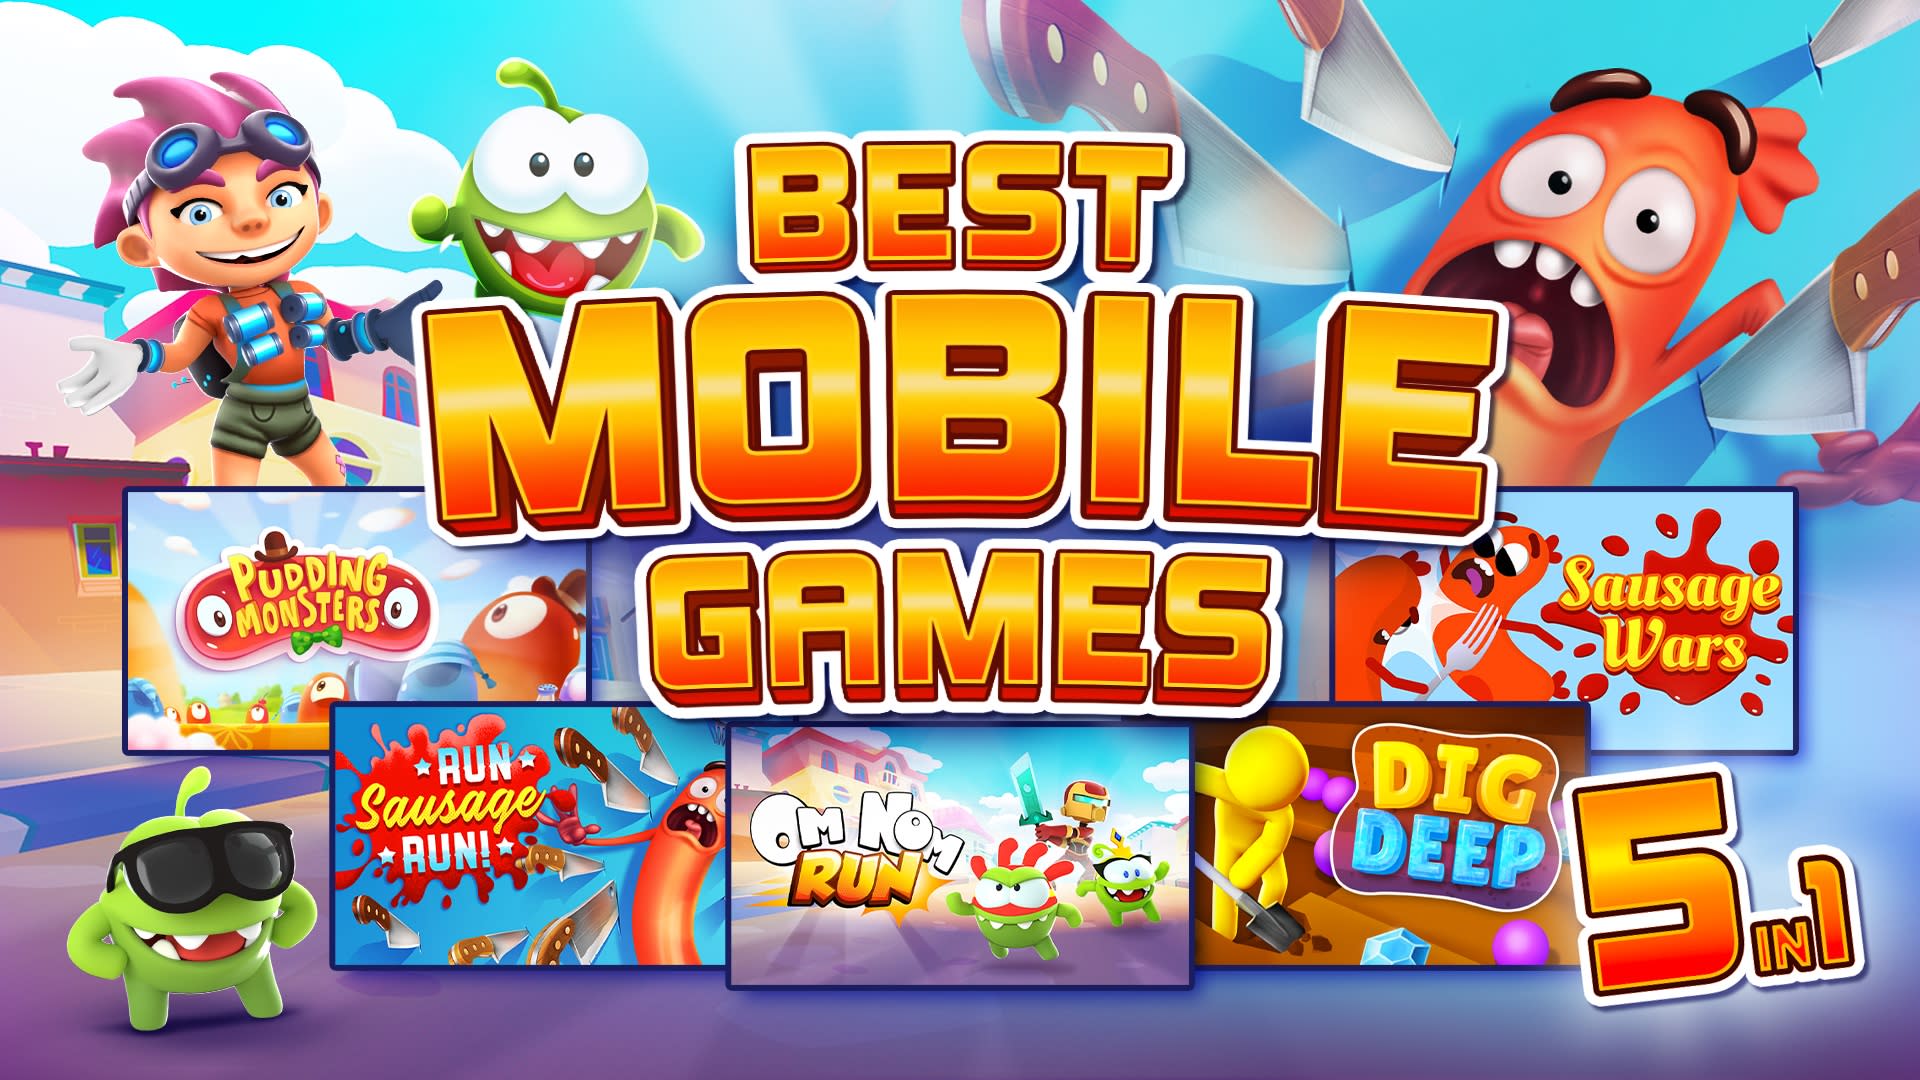 Best Mobile Games 5-in-1